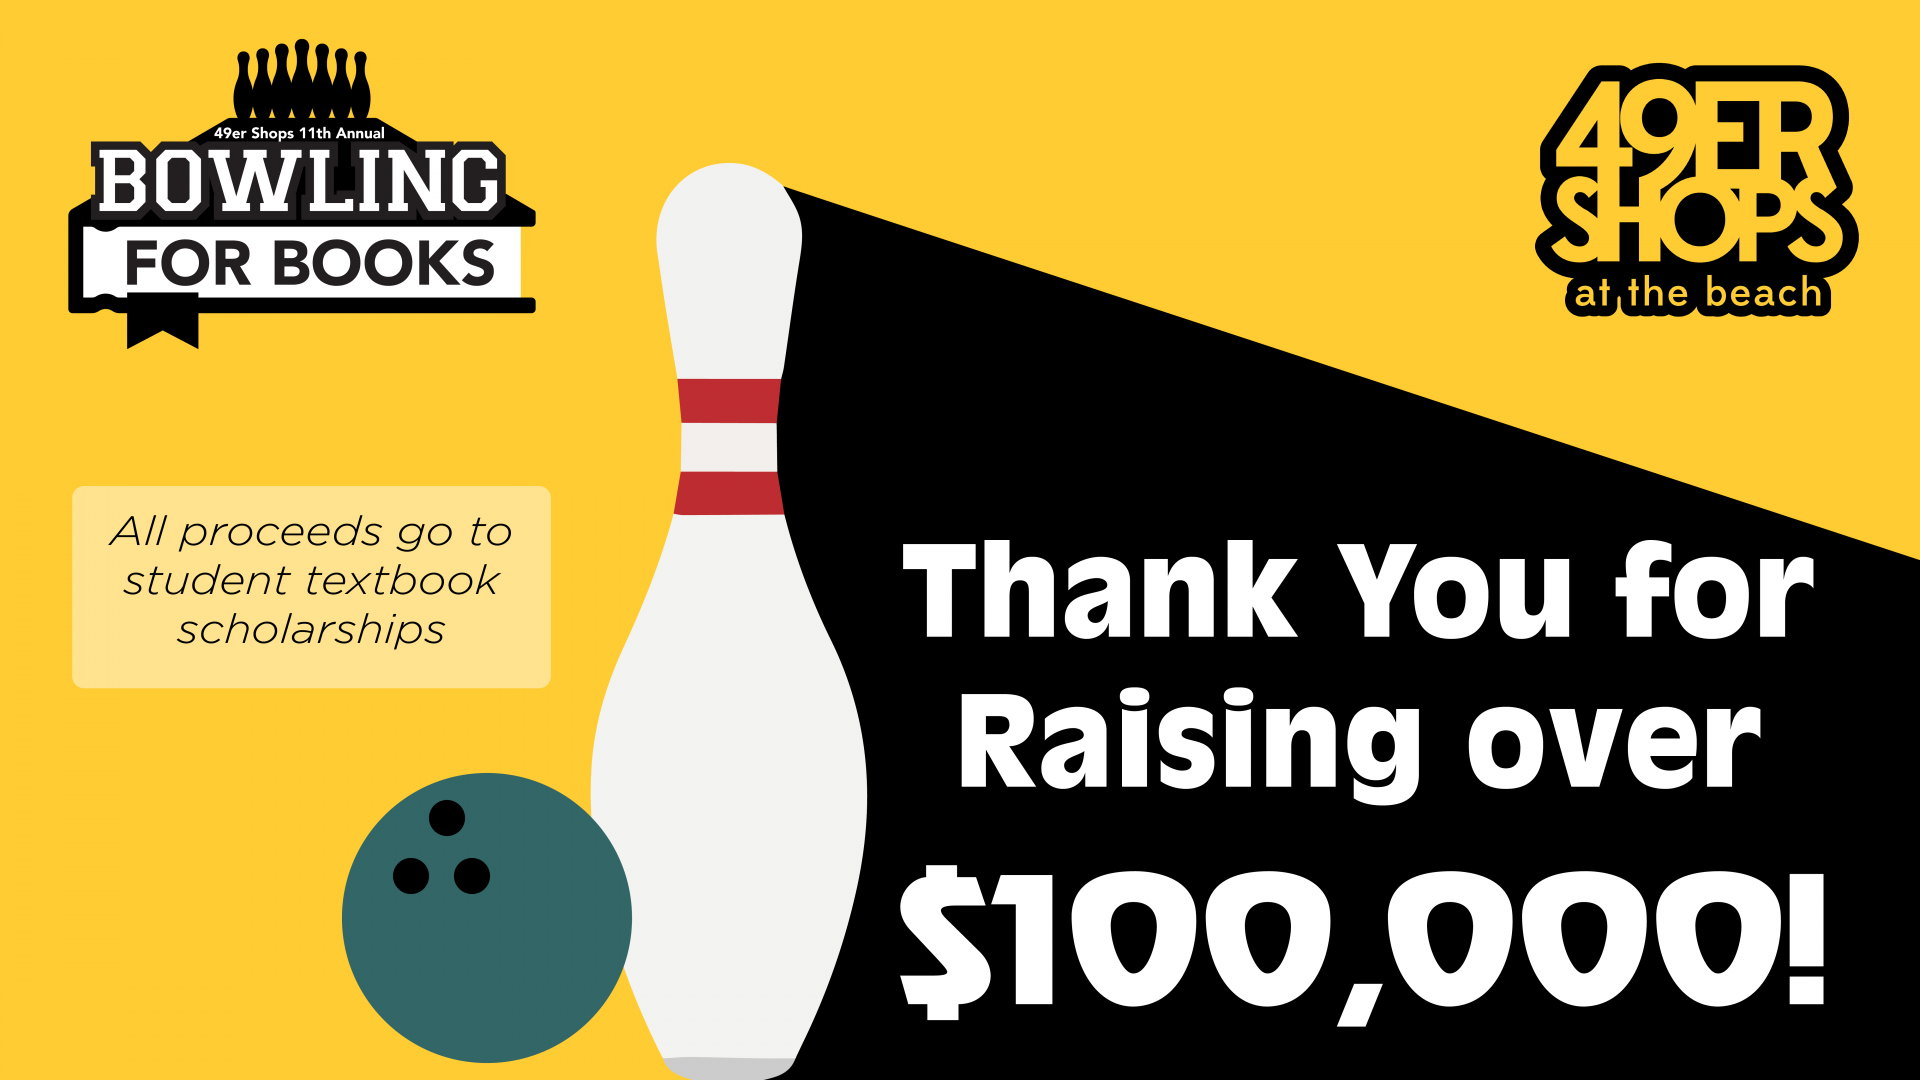 Thank you for raising over $100,000! All proceeds go to student textbook scholarships.